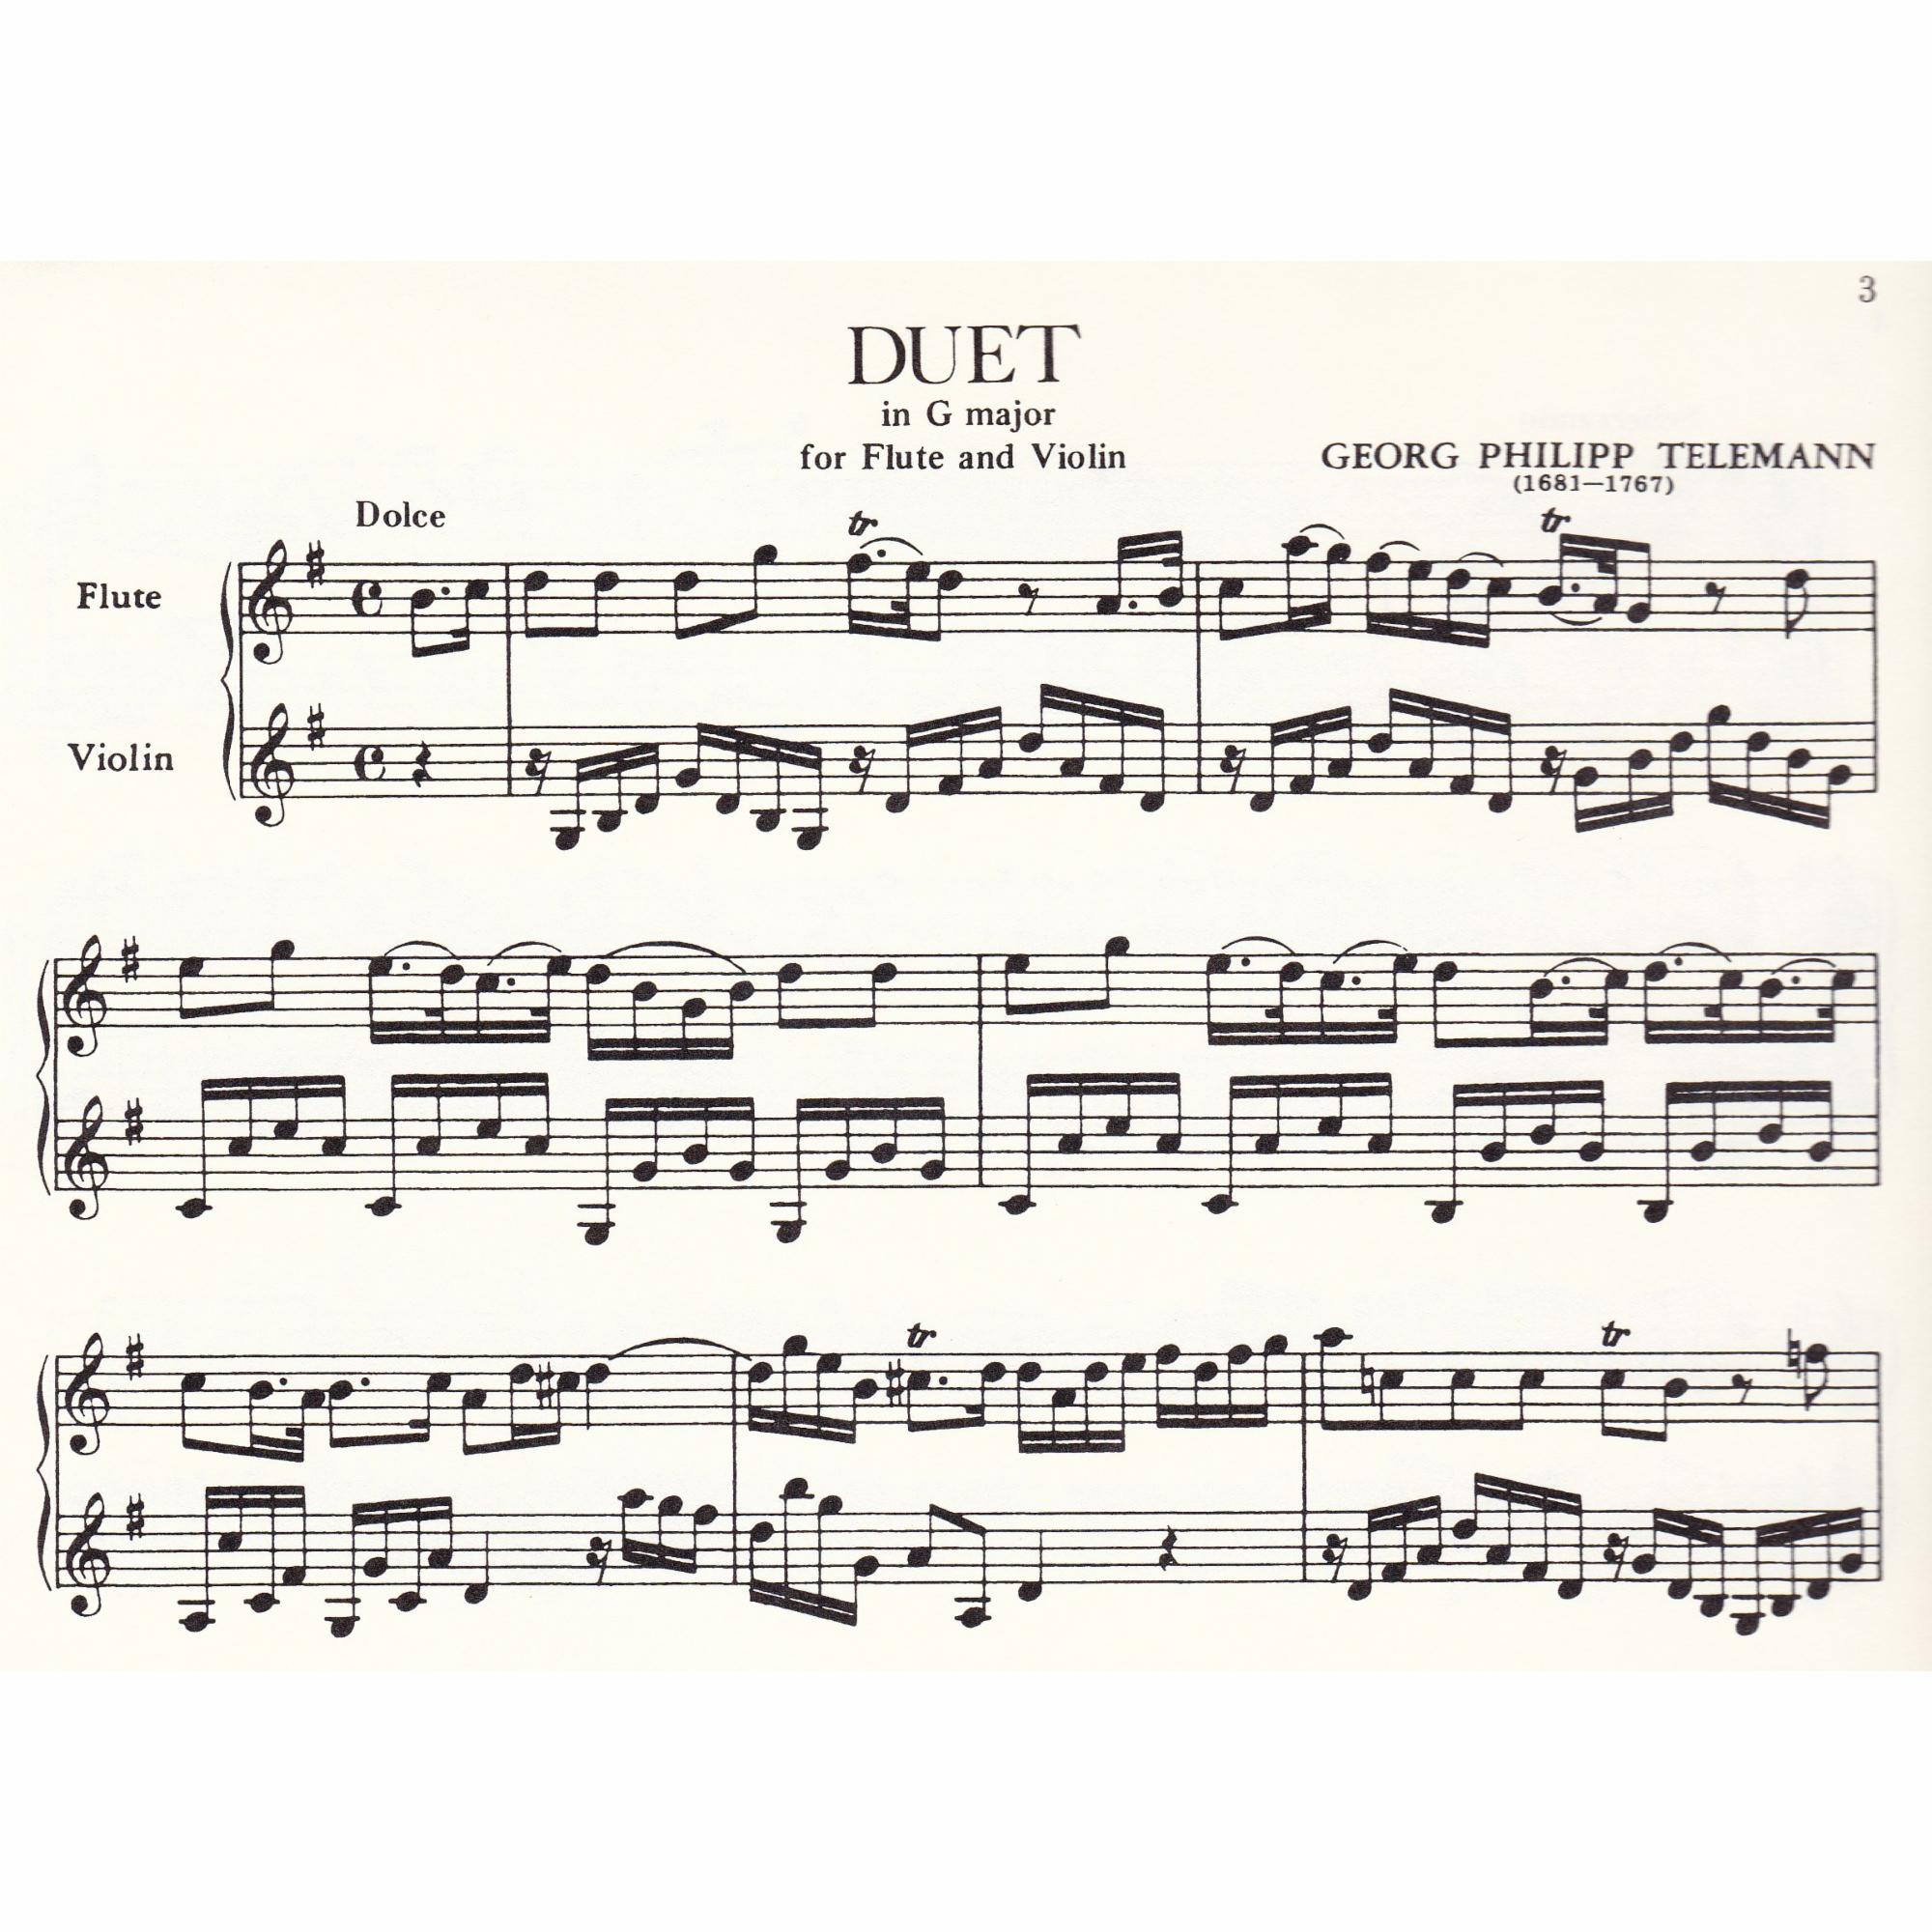 Duet in G Major for Flute and Violin